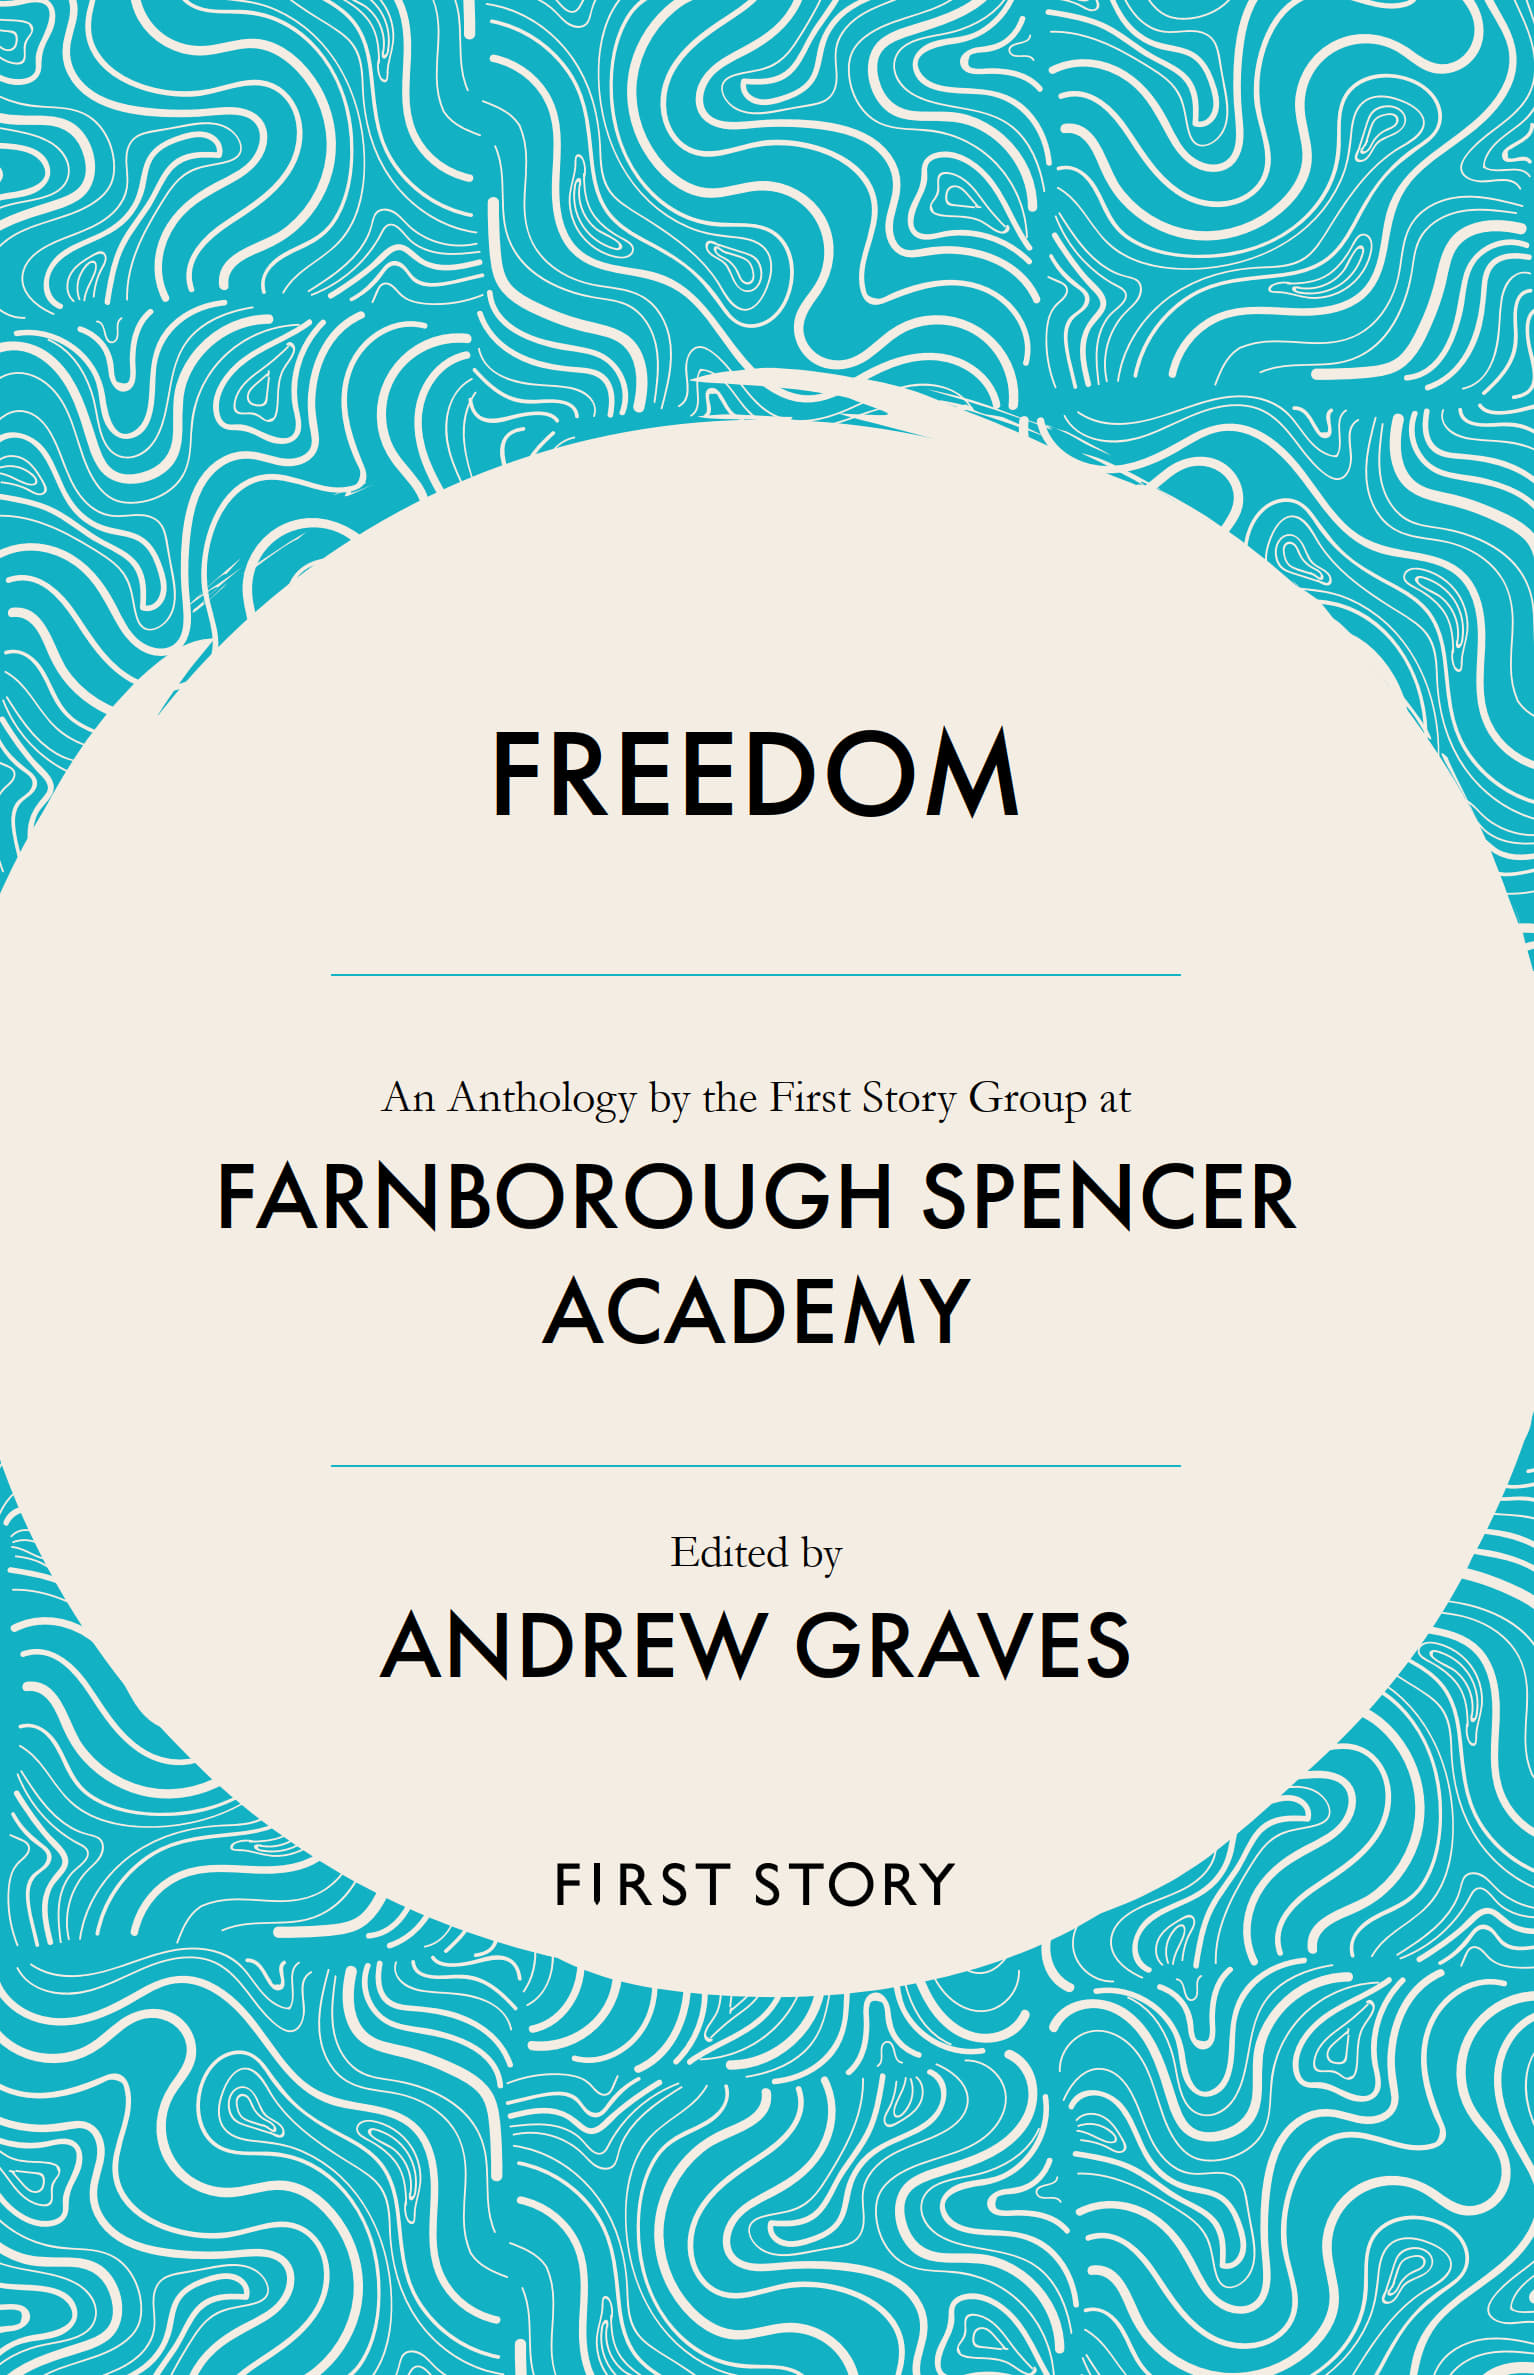 Cover of First Story Anthology for Farnborough Spencer Academy, titled Freedom